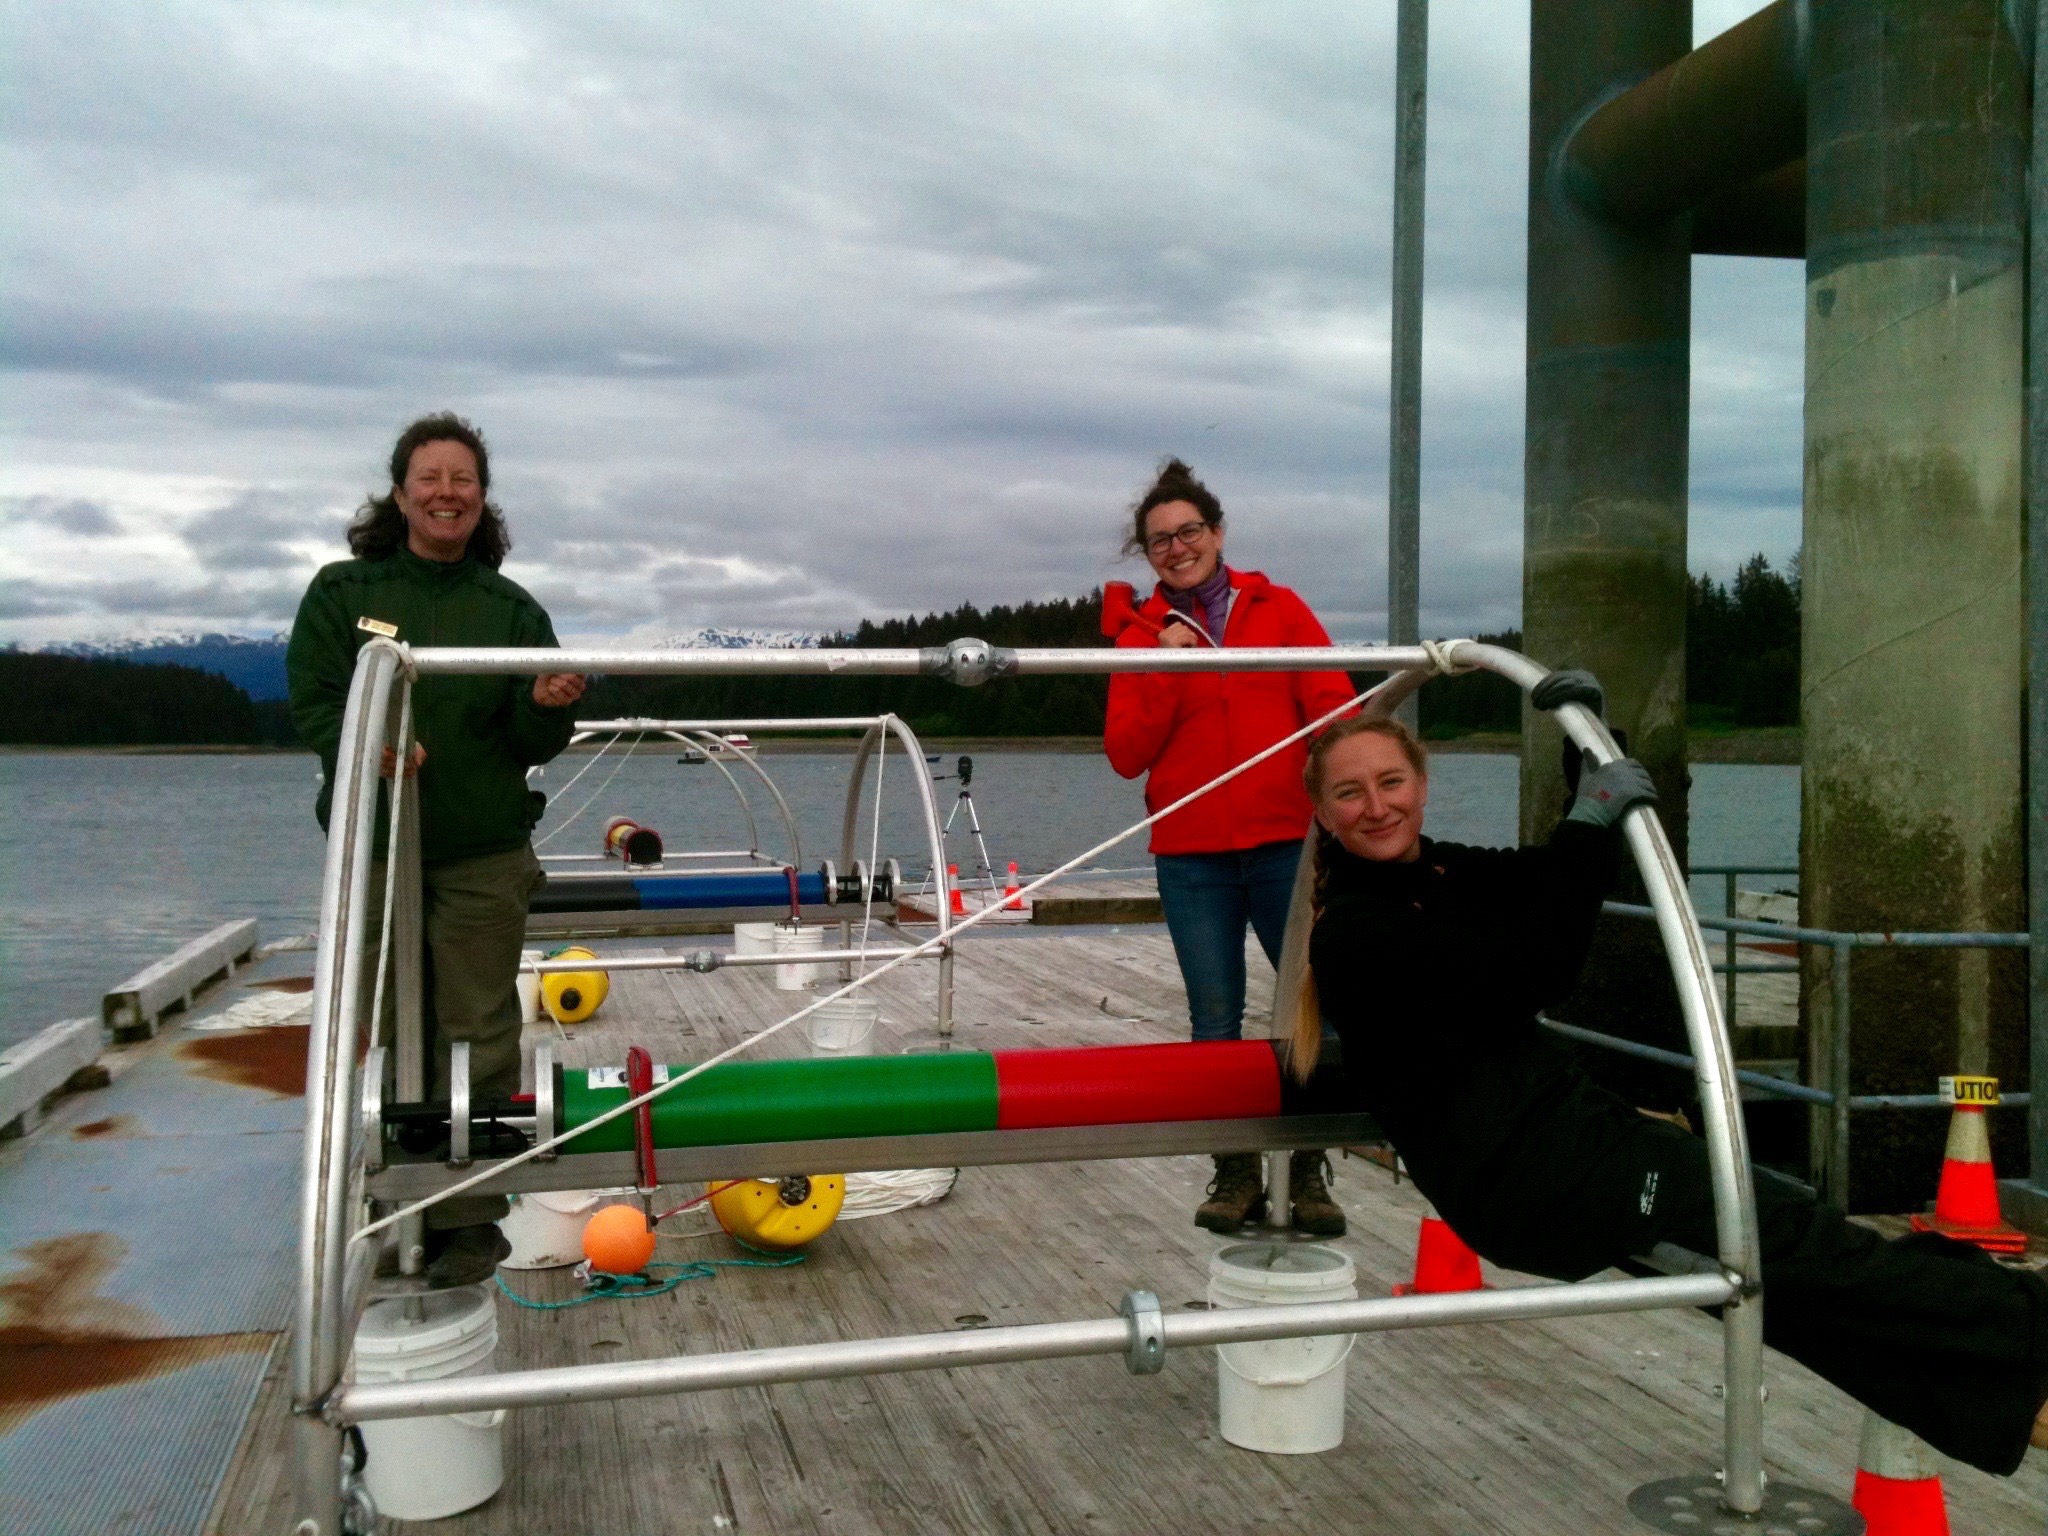 lab members posing with equipment on dock